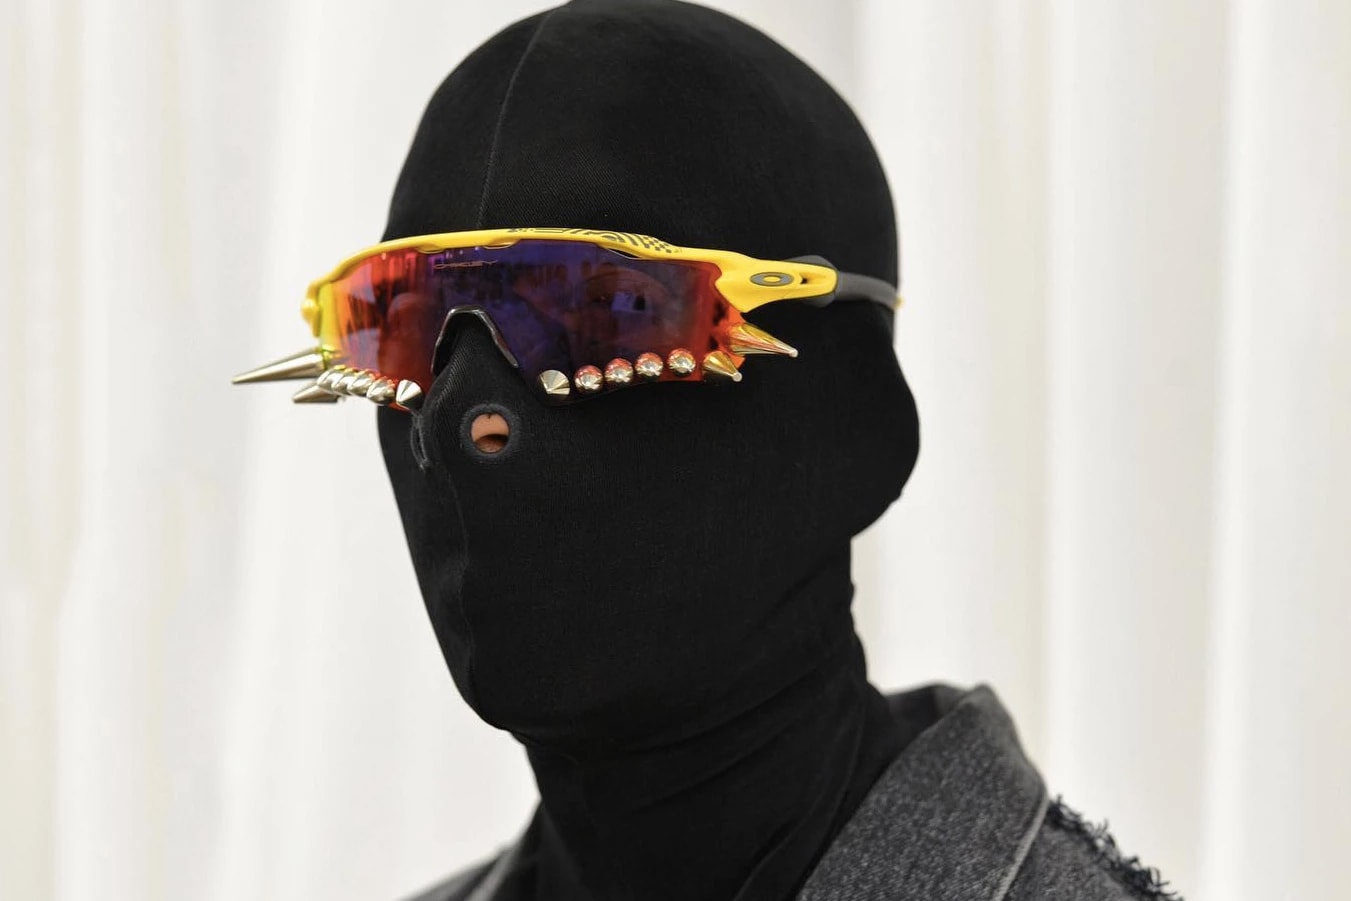  Pre-order Vetements x Oakley Sunglasses Collab Studded Spiked Shades Sporty SS19 